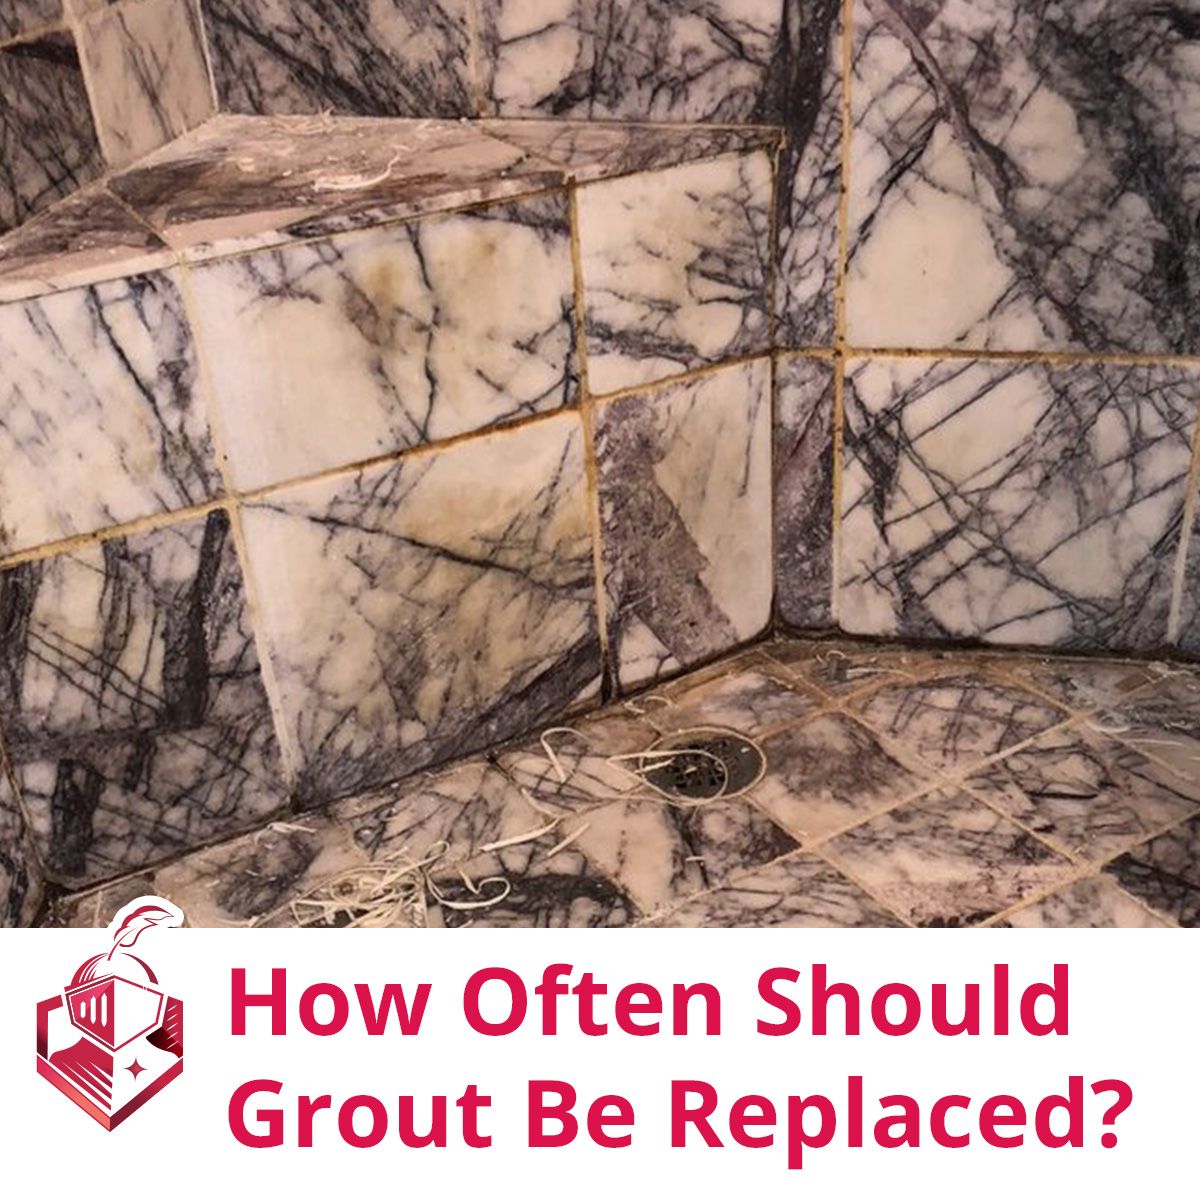 How Often Should Grout Be Replaced?